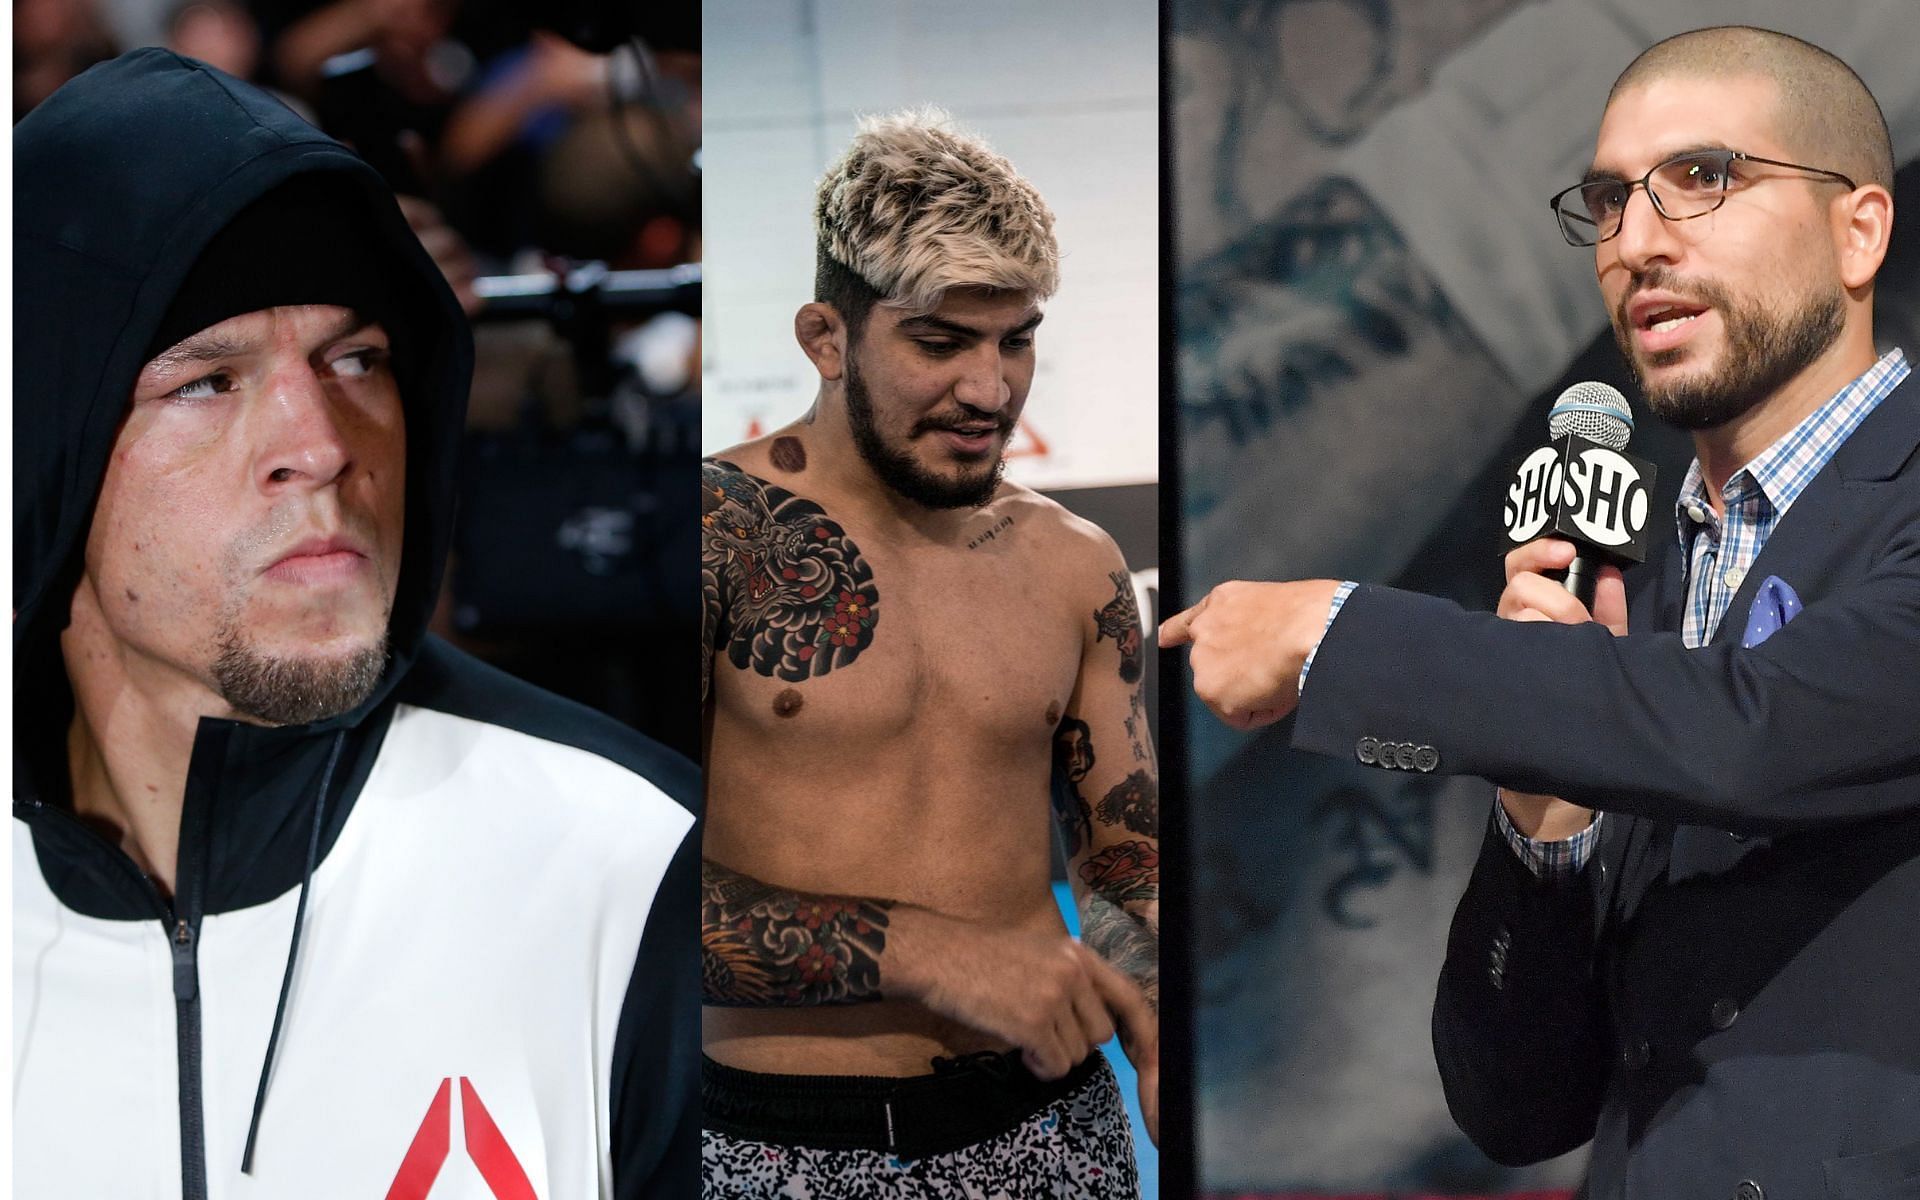 Nate Diaz (L), Dillon Danis (C), and Ariel Helwani (R) (Images courtesy: center image from @dillondanis on Twitter)